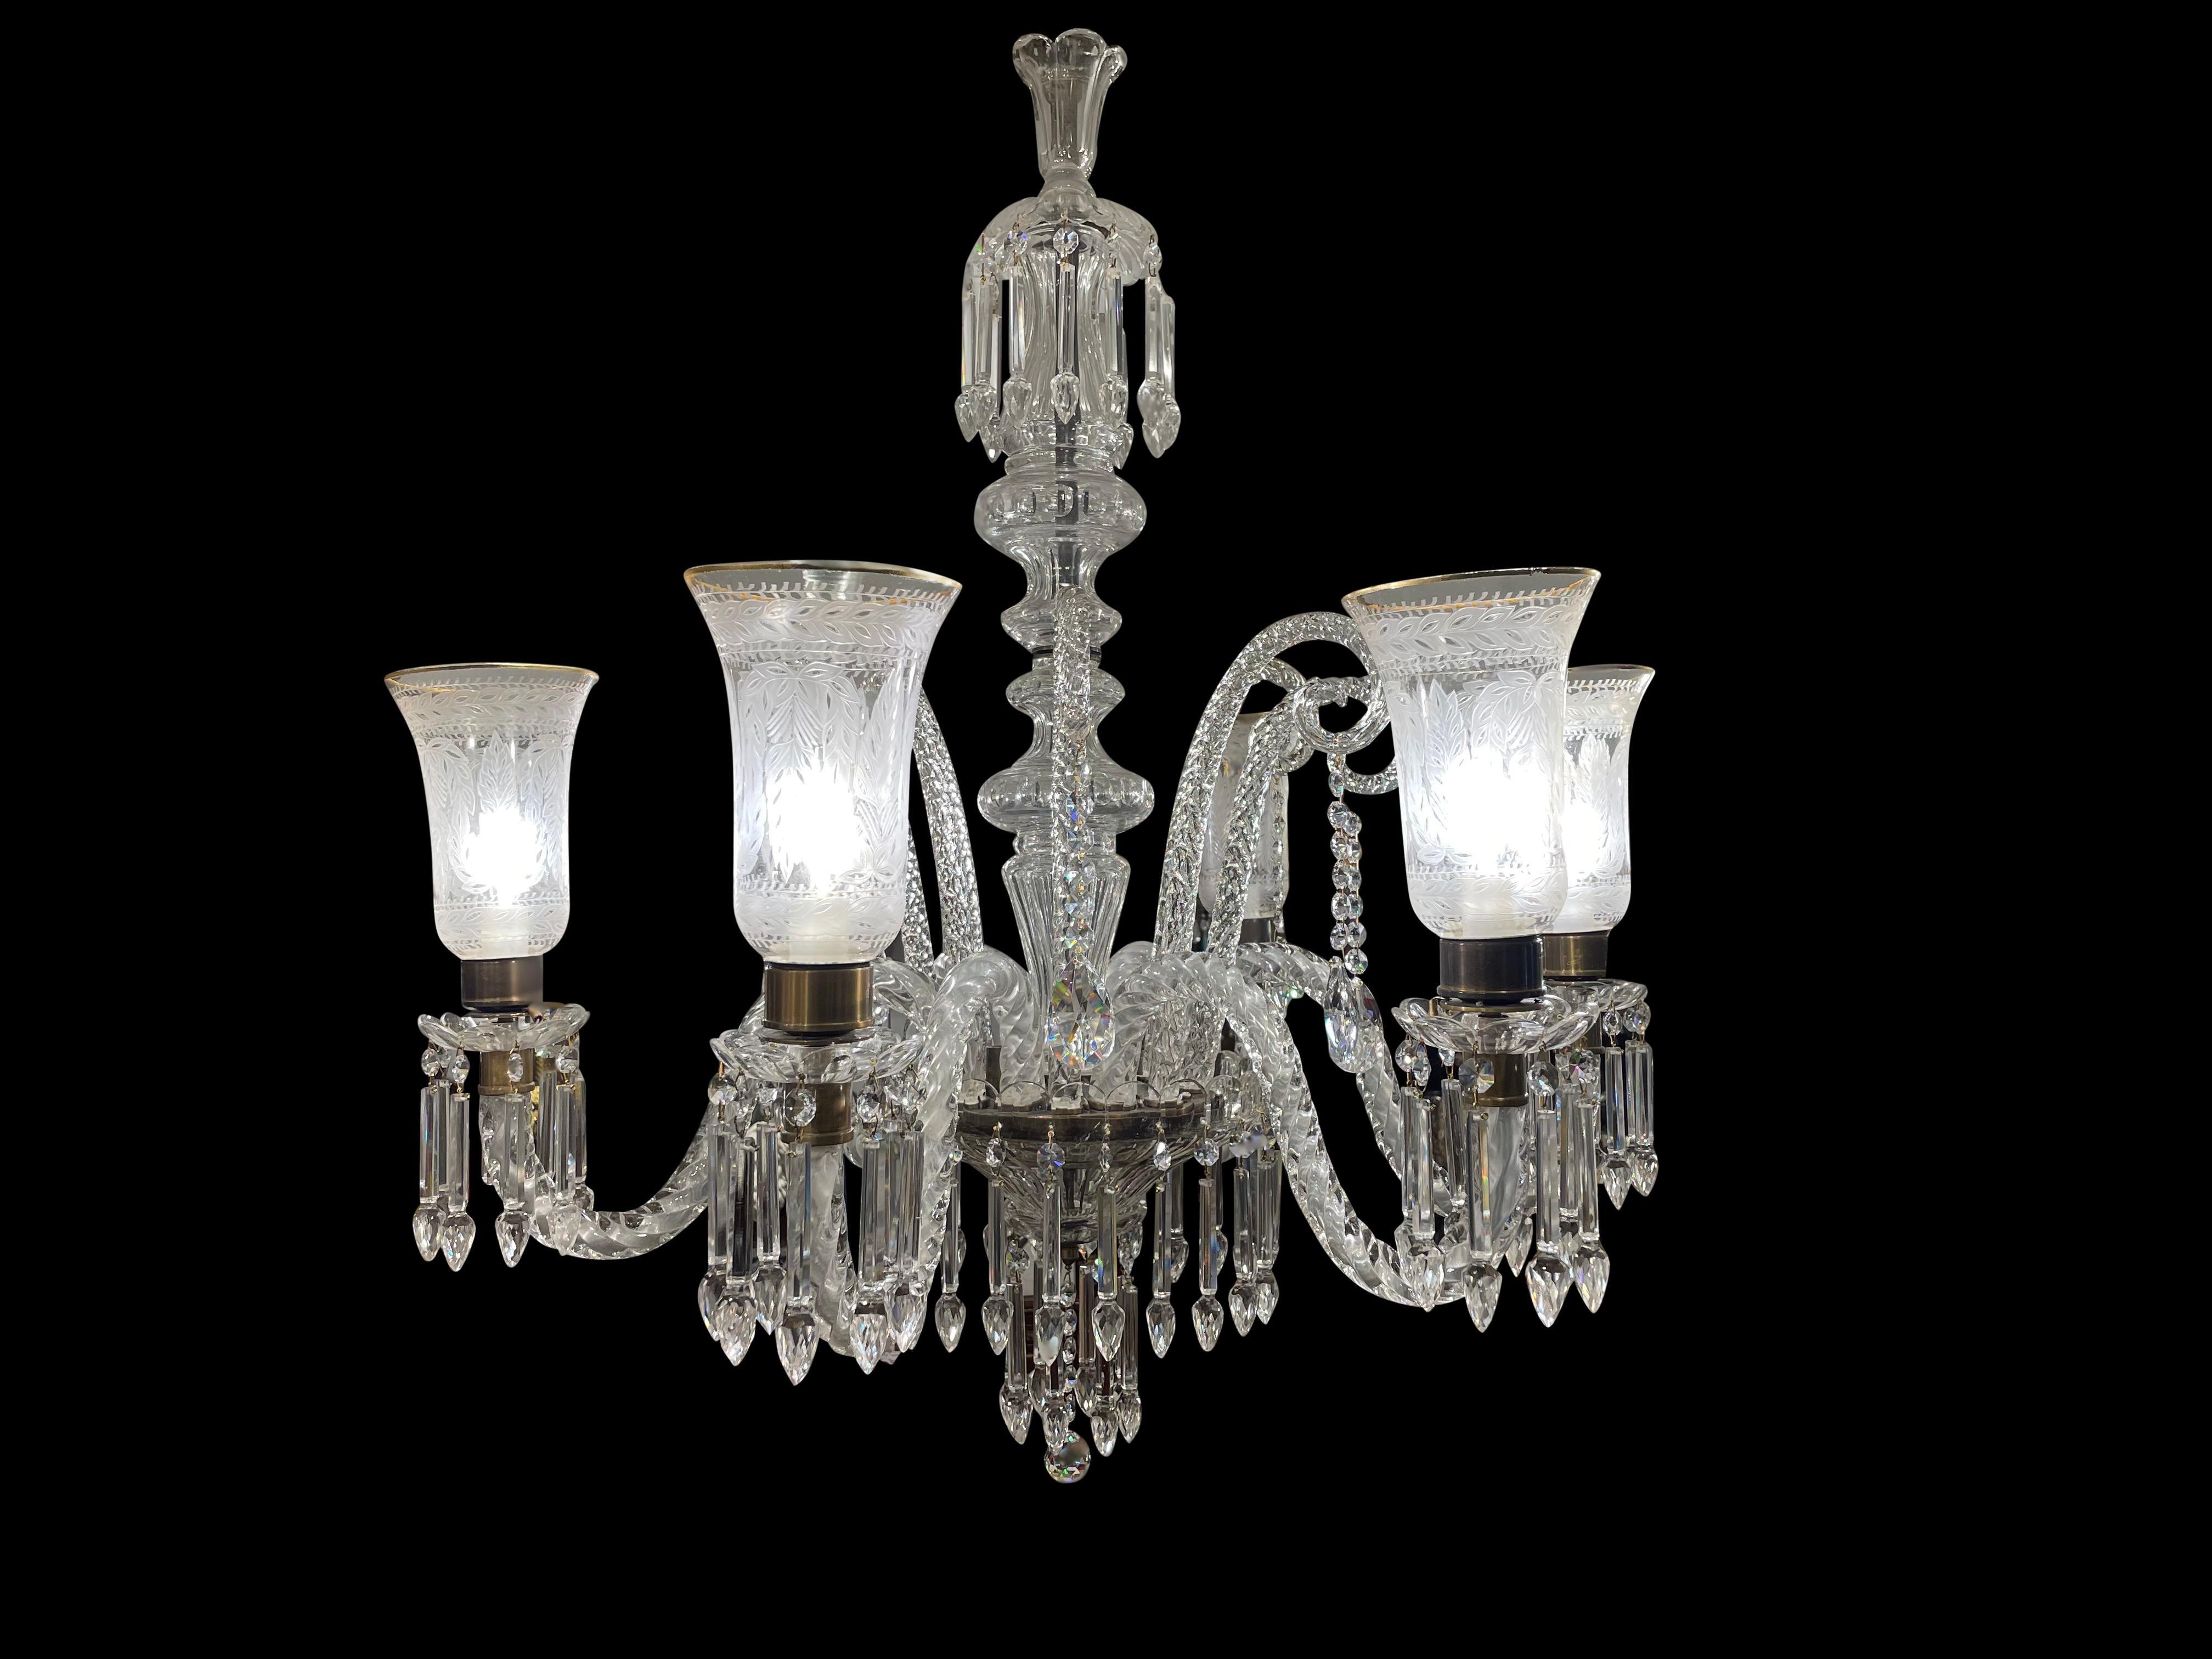 Cut Crystal Chandelier with Engraved Hurricane Shades, 20th Century For Sale 3